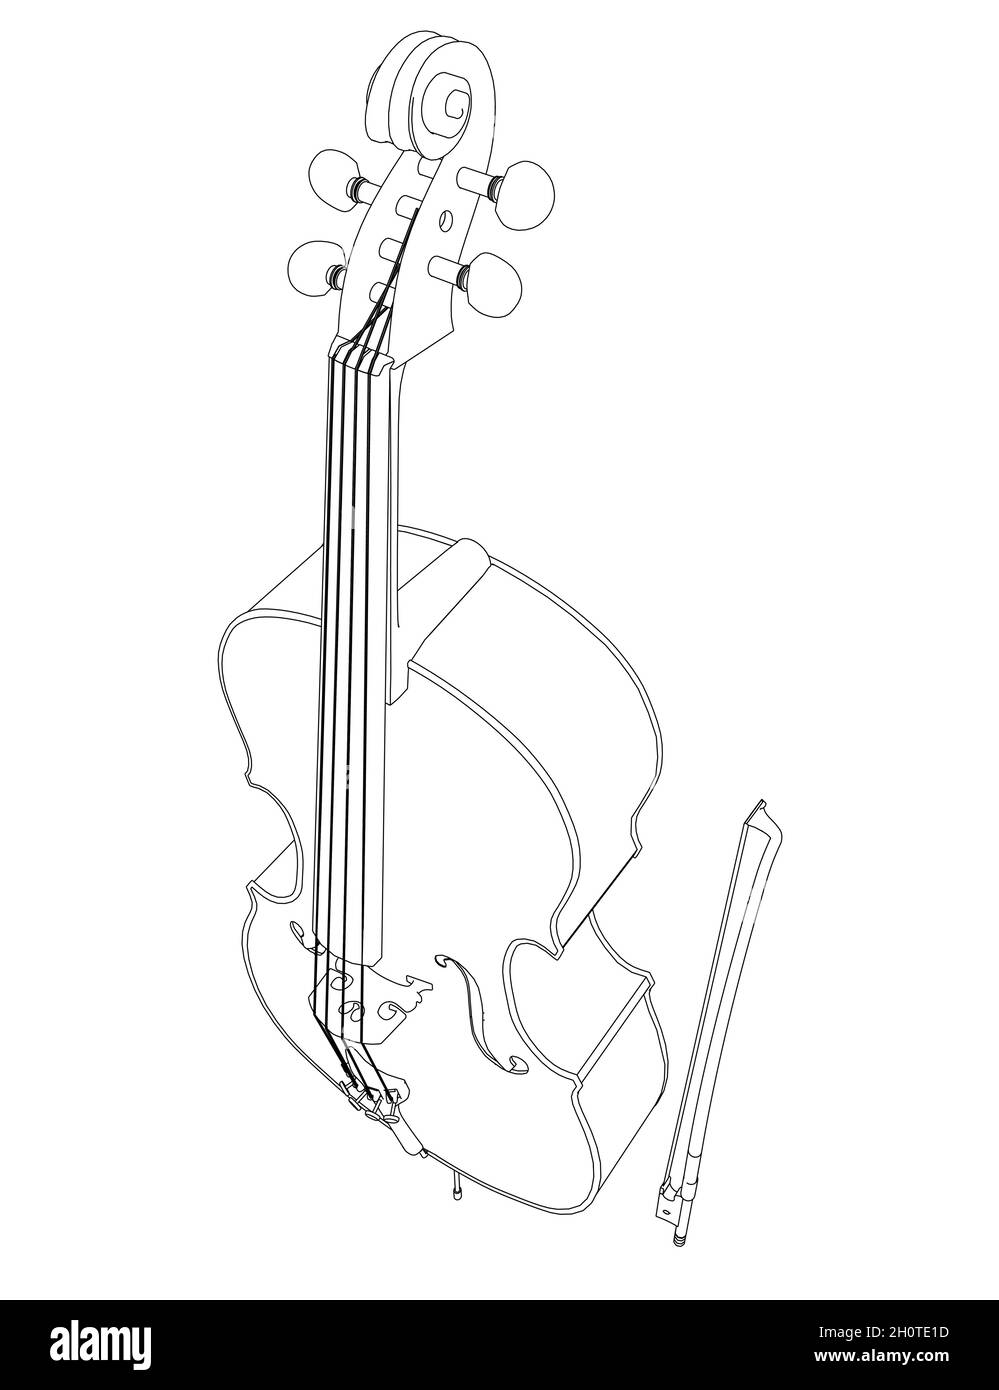 Violin contour from black lines isolated on white background. Perspective view. Vector illustration. Stock Vector